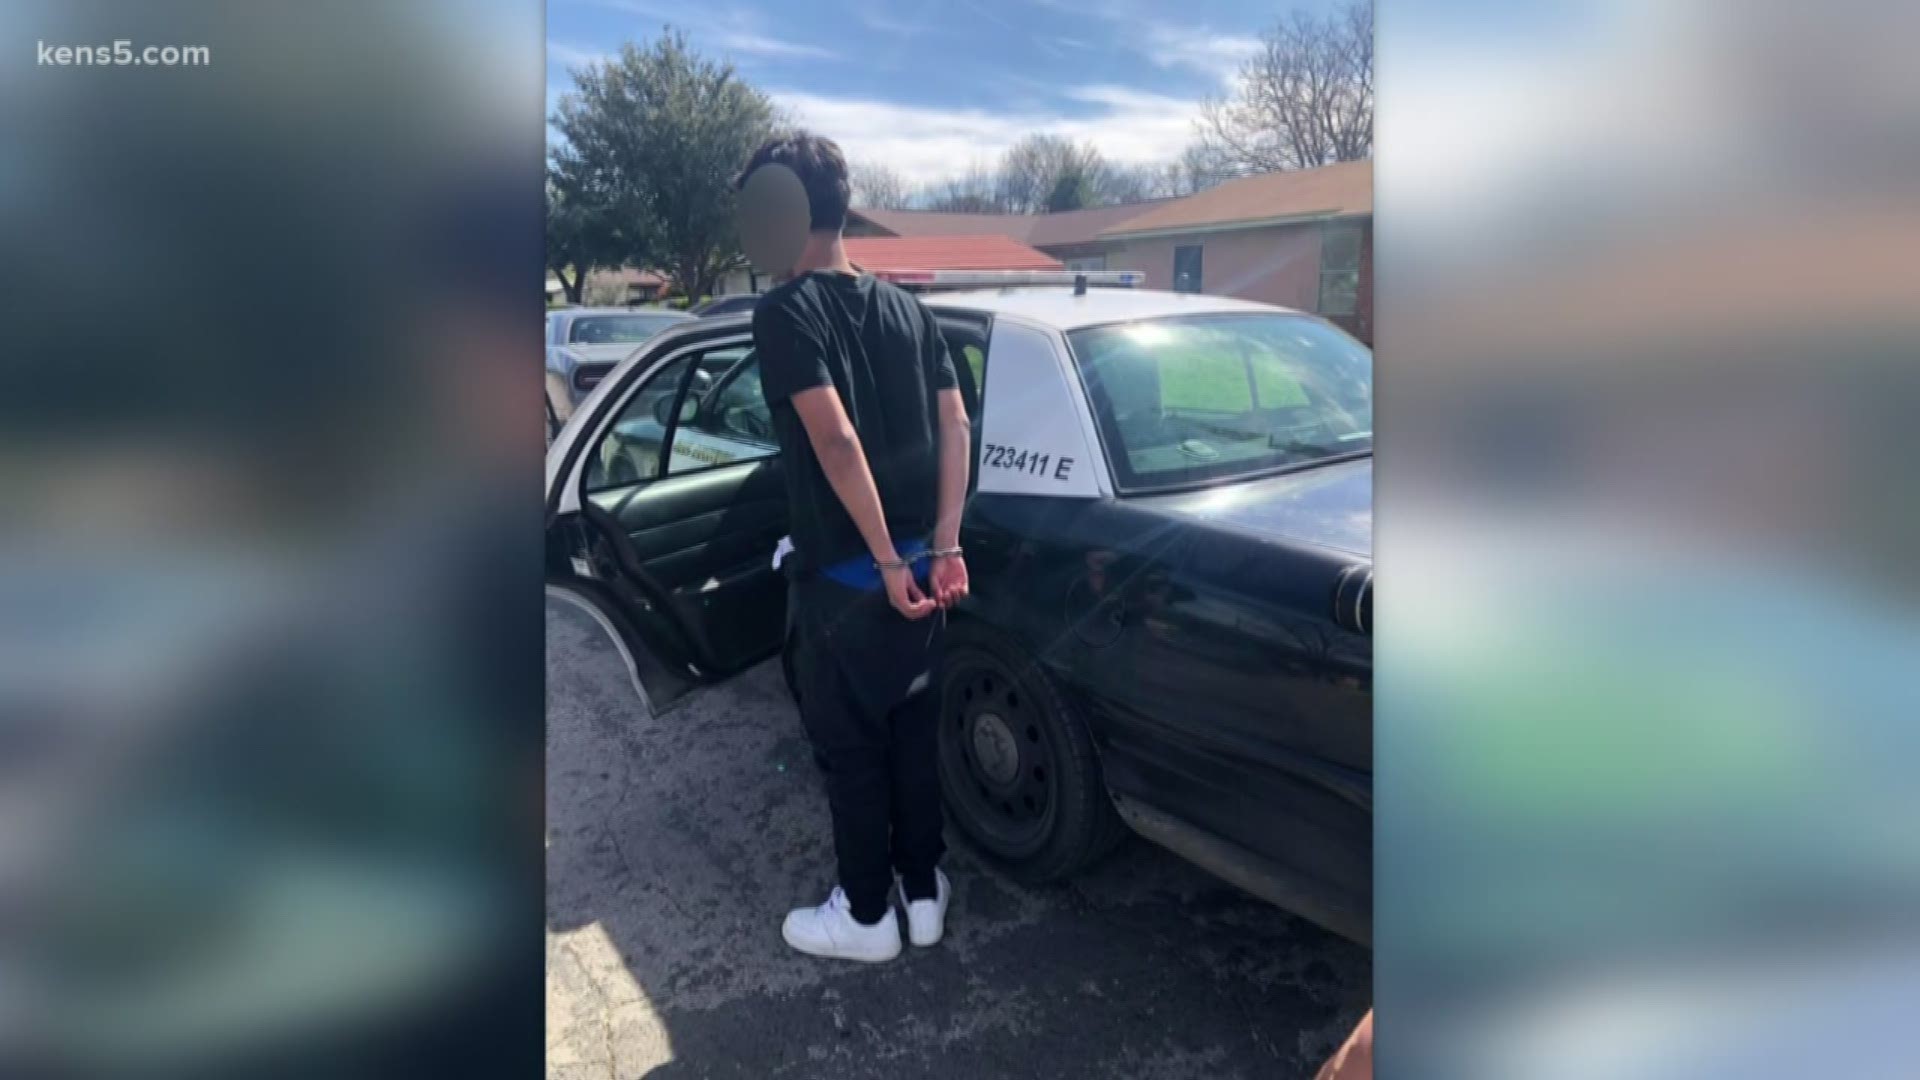 Police shared photos of the arrested teenagers alongside the allegedly stolen pizza and the weapon police say was brandished during the crime.